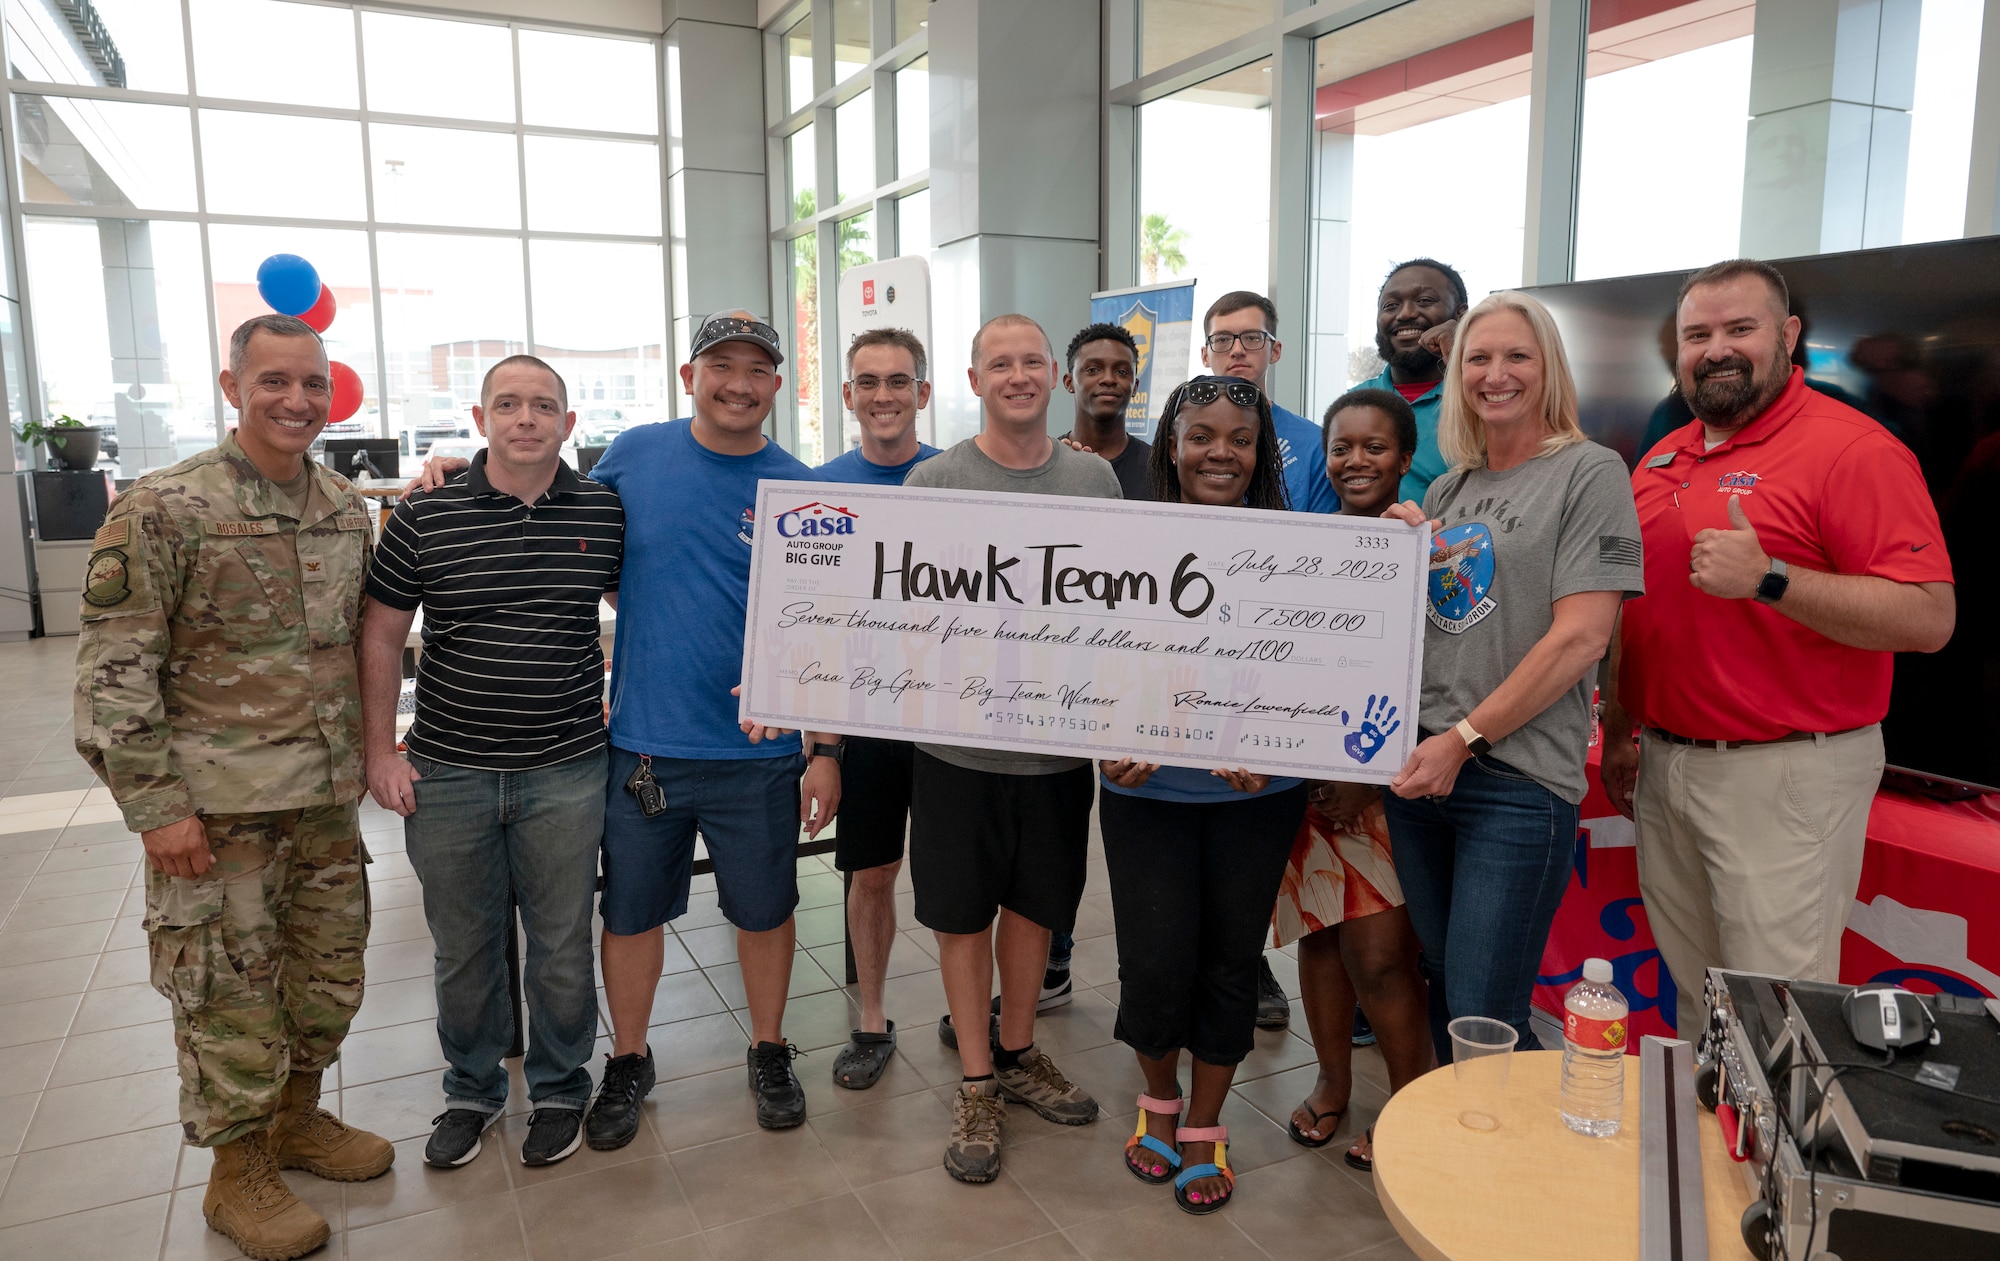 Members from the 6th Attack Squadron accept a check for winning first place in the large team category at the 2023 Casa’s Big Give at Casa Auto Group, Alamogordo, New Mexico, July 28, 2023. The 6th ATKS contributed over 400 volunteer hours and raised $4,000 to help refurbish the Riner Steinhoff soccer complex at Alamogordo High school, which was part of Casa’s Big Give funding for community improvement projects. (U.S. Air Force photo by Airman 1st Class Michelle Ferrari)